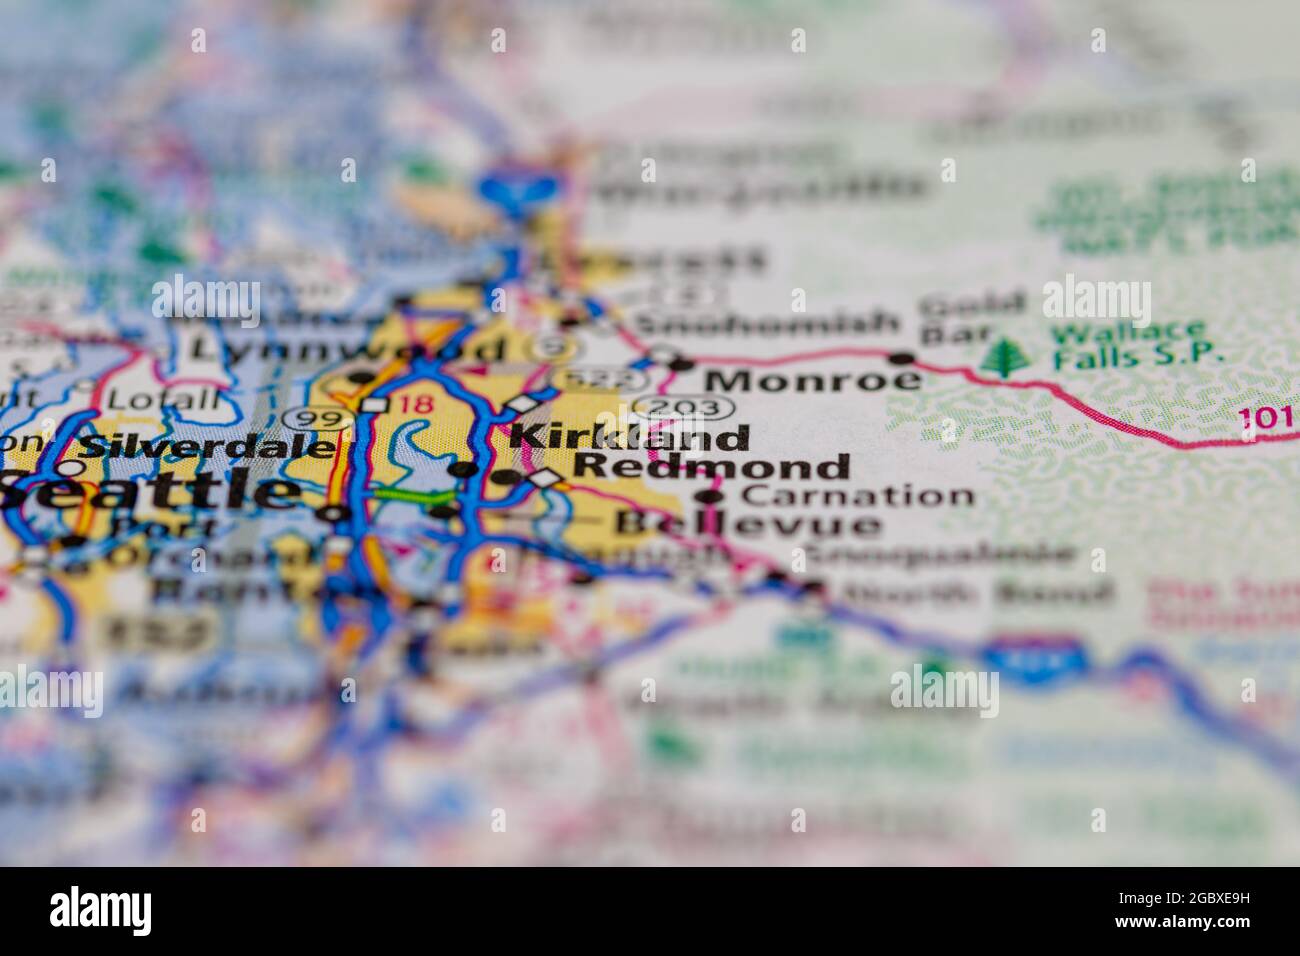 Kirkland Washington State USA shown on a road map or Geography map Stock Photo